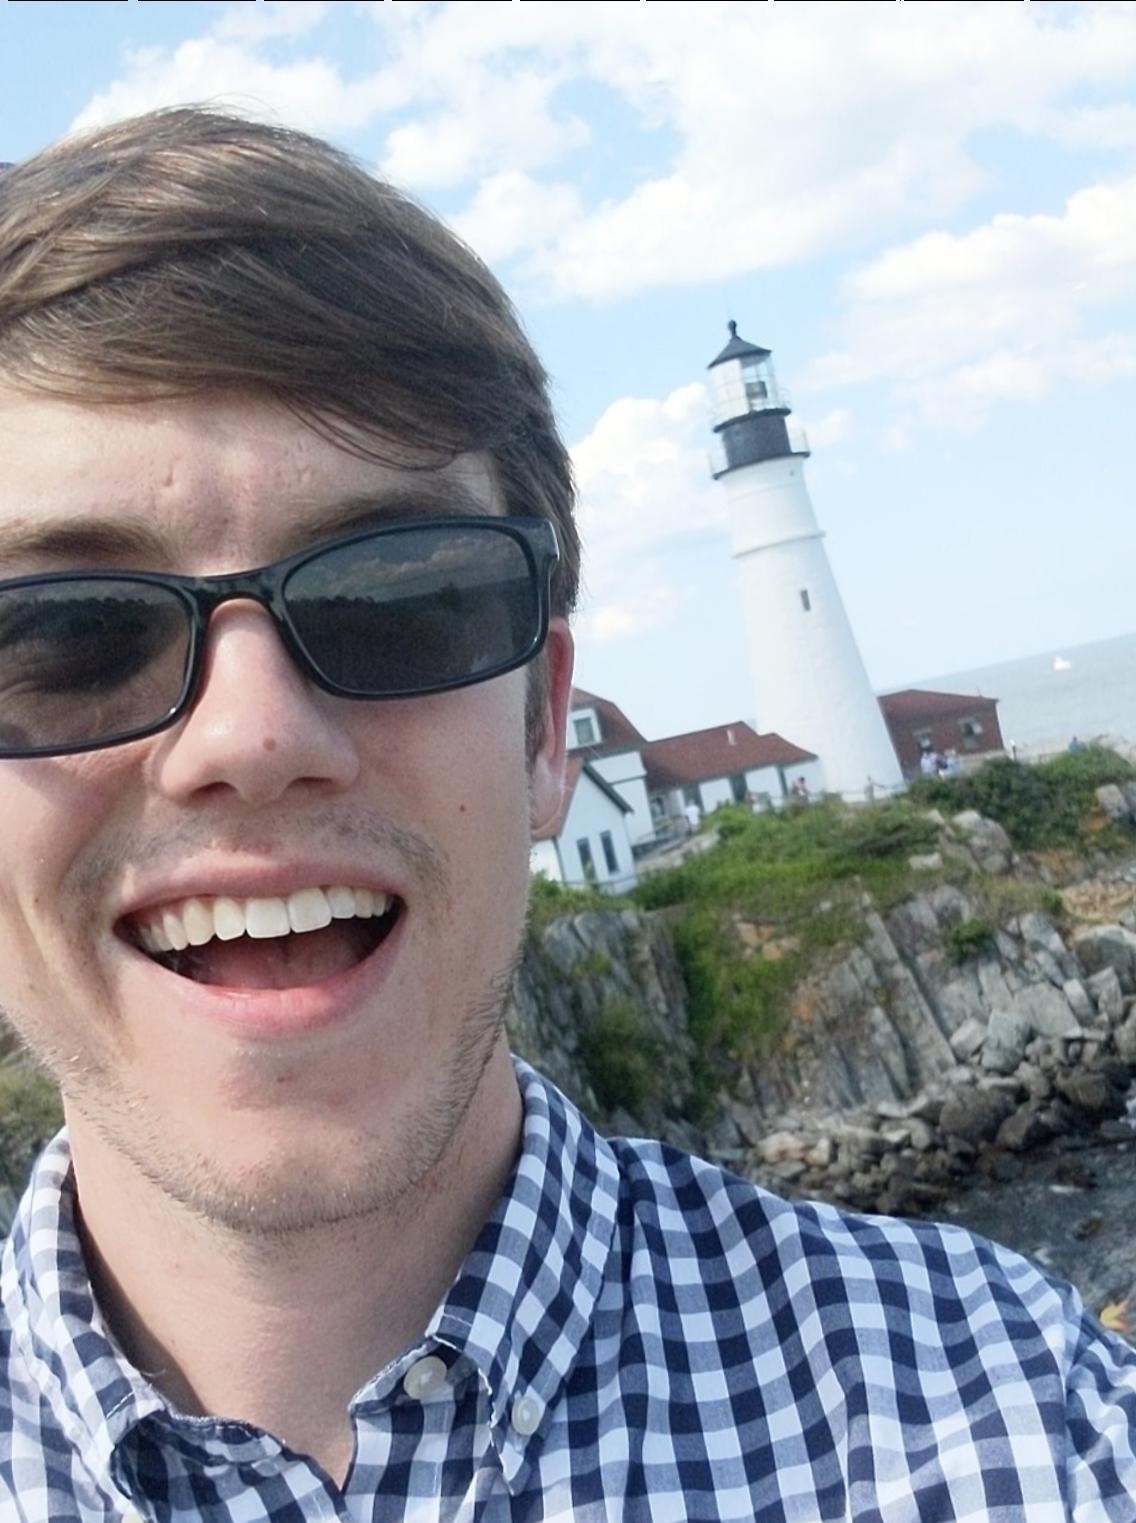 Carter Koehler is a white man with brown hair. He wear sunglasses and a white and navy blue plaid shirt. In the background behind him is a white lighthouse.